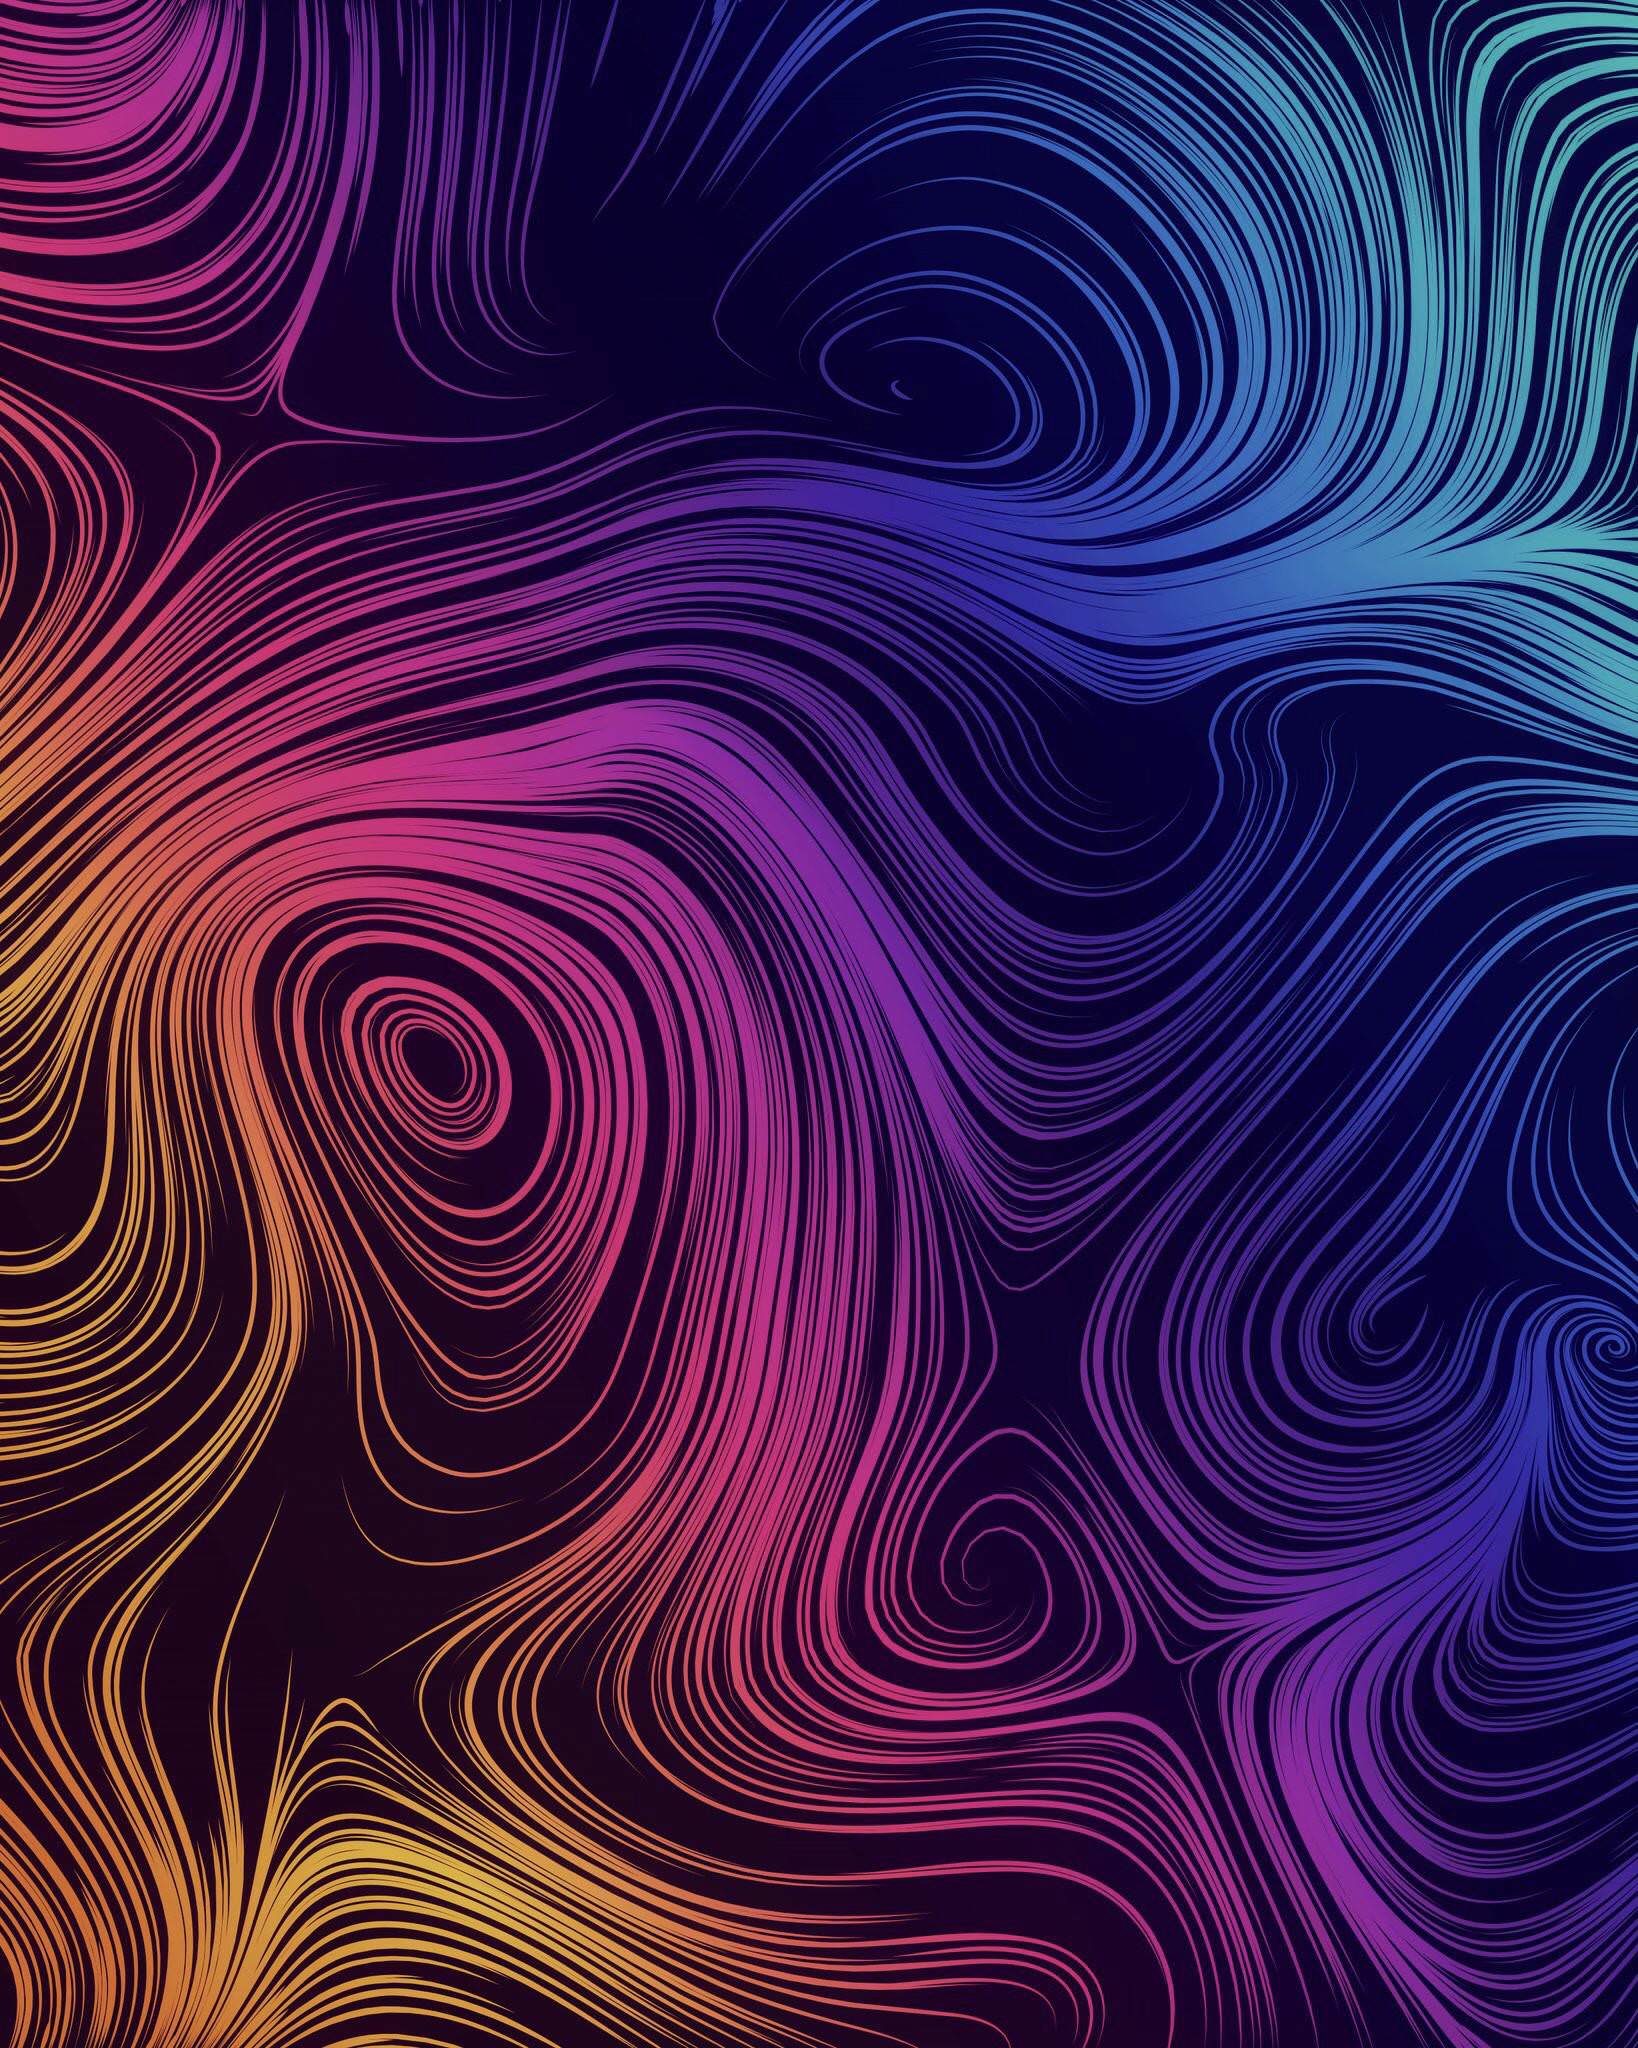 Is this the Galaxy S9 wallpaper from MKBHD?